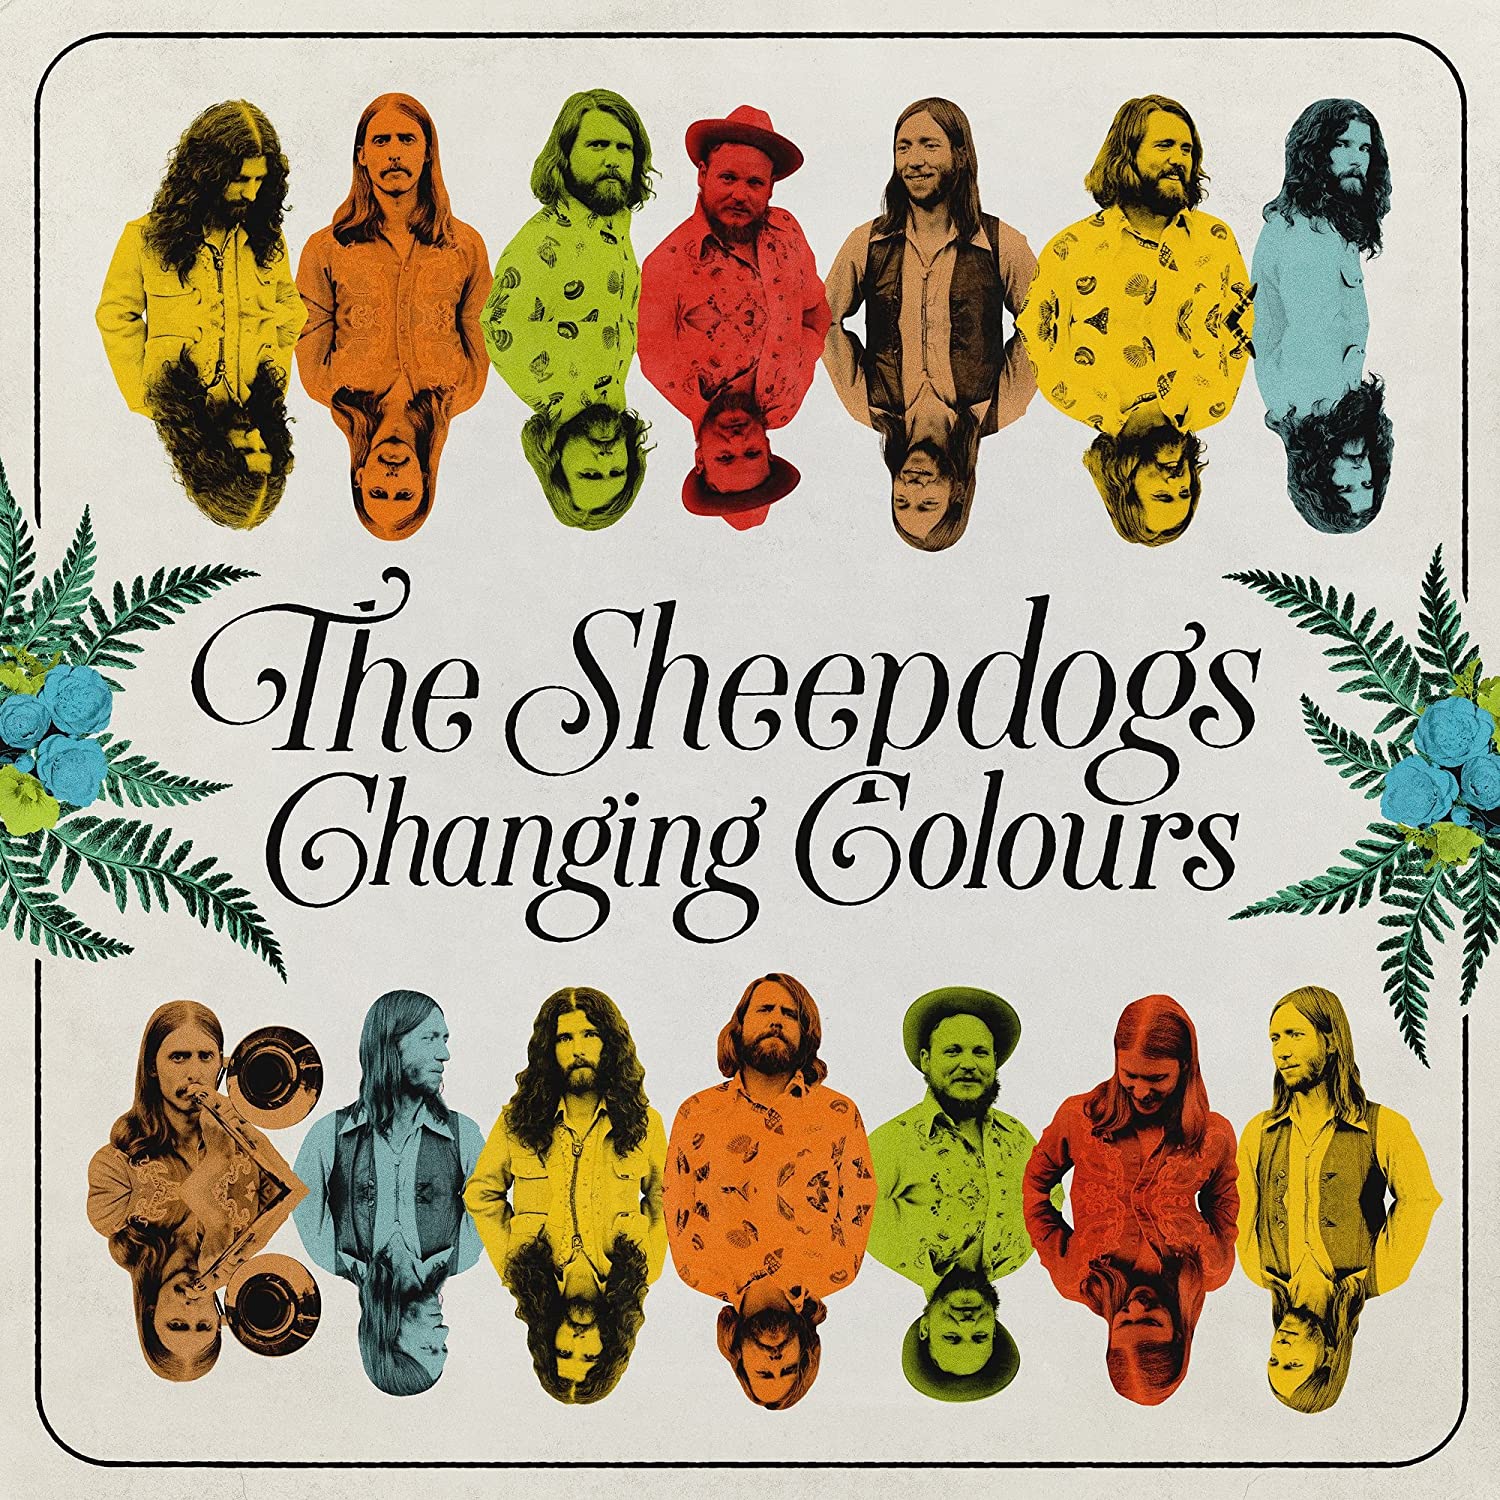 The Sheepdogs Changing Colours